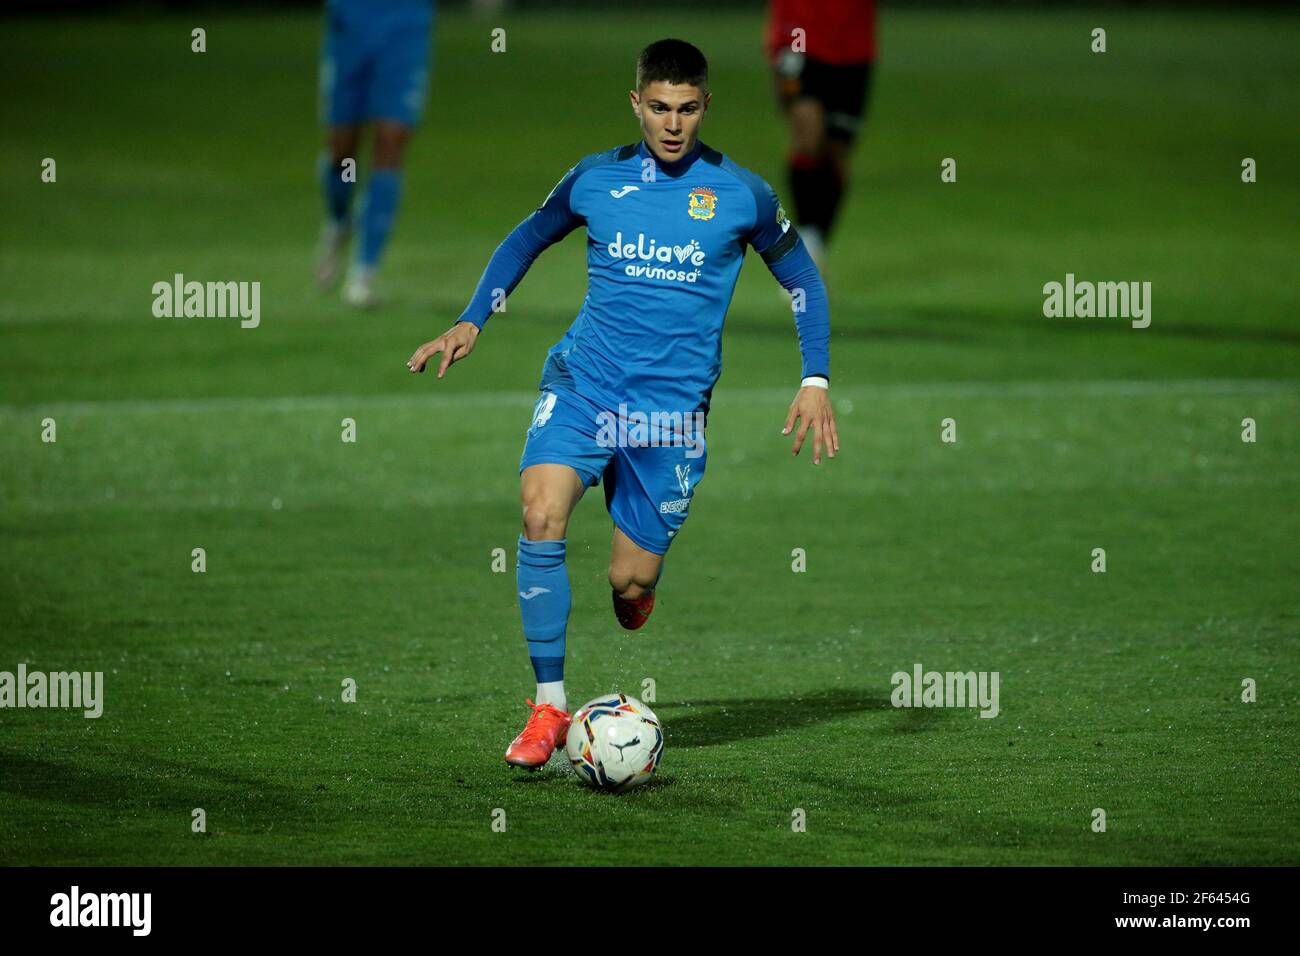 Fuenlabrada, Madrid, Spain, 29.03.2021C. F. Fuenlabrada against R. C. D. Mallorca match of the second division of Spanish soccer in match 31. Fuenlabrada player Oscar Pichi Final score 4-1 winner Fuenlabrada with goals from the players Oscar Pichi 13 y 38  Nteka 41  and Pathe Ciss 73  Mallorca scores his player Mboula 56  Photo: Juan Carlos Rojas/Picture Alliance | usage worldwide Stock Photo